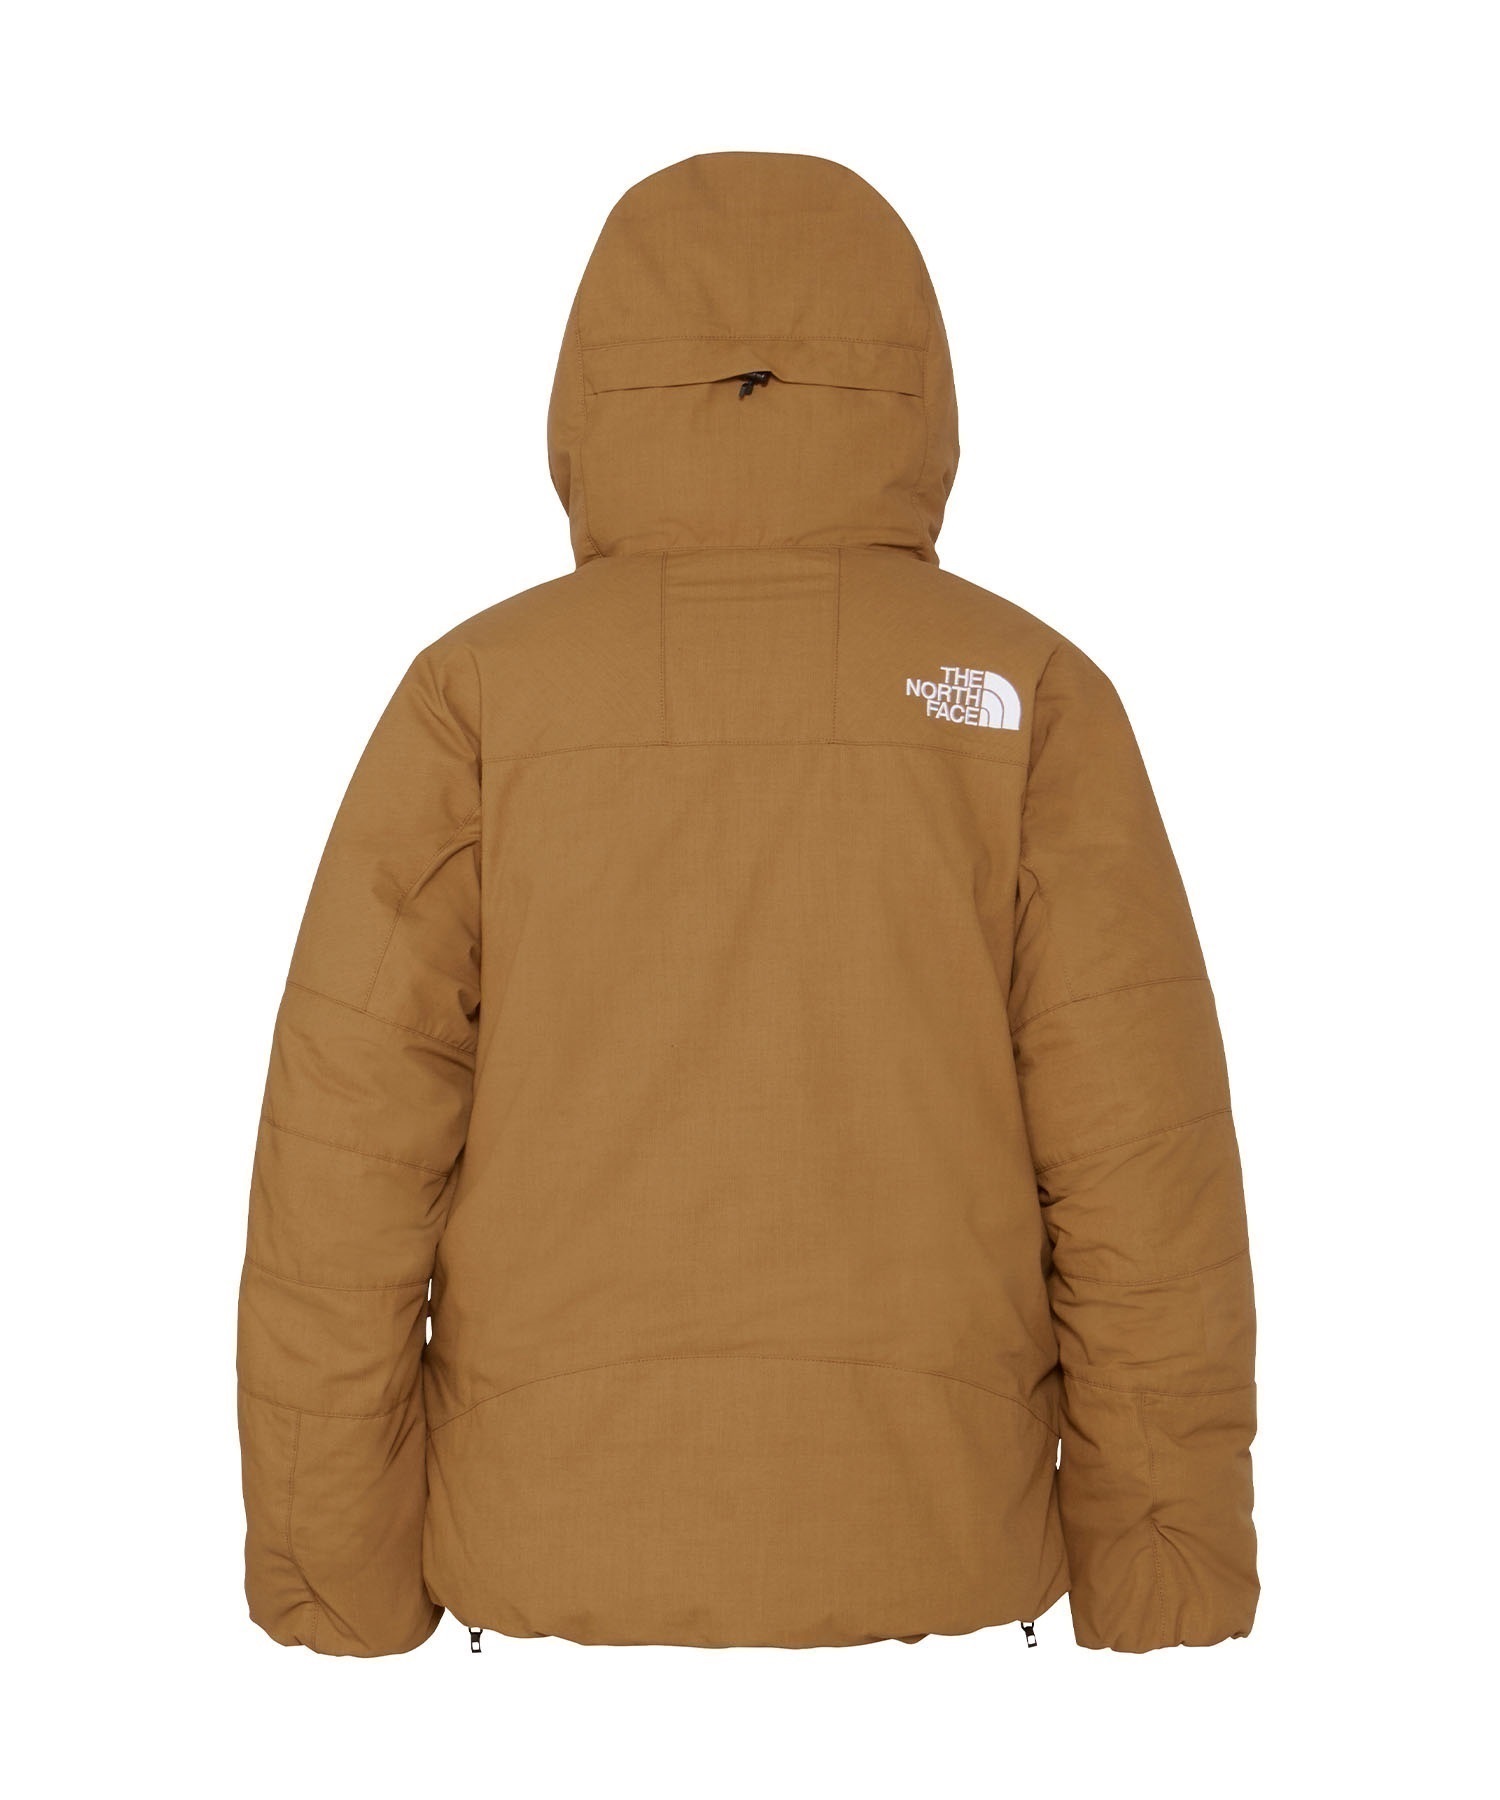 THE NORTH FACE/ノース・フェイス FIREFLY INSULATED PARKA ファイヤー